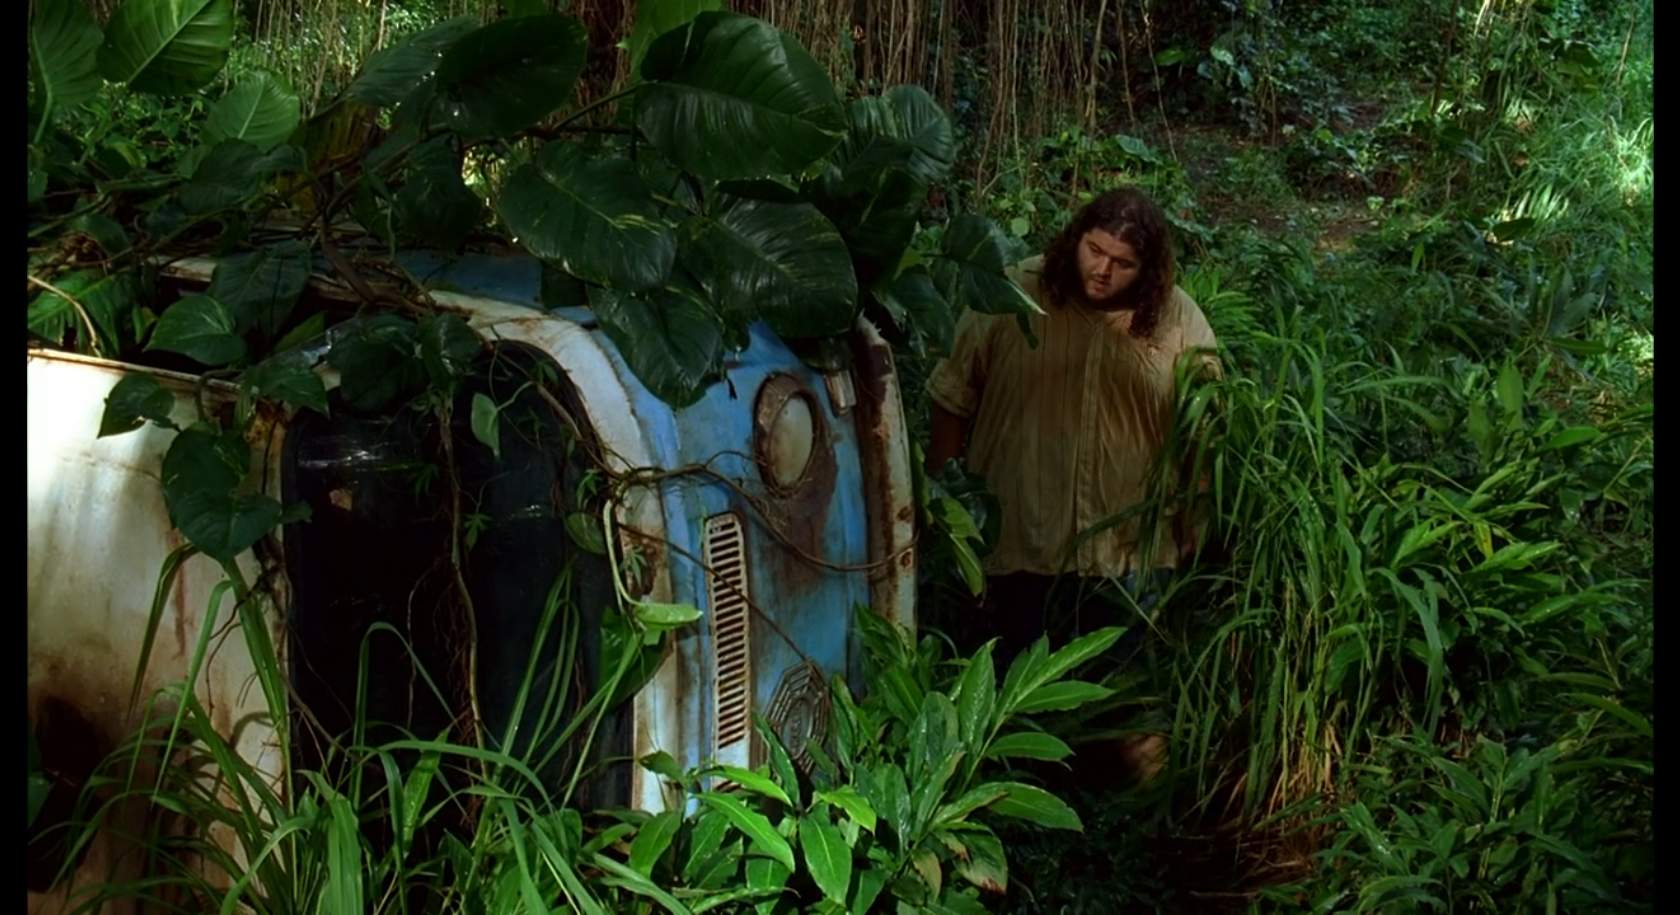 Hurley comes upon a overturned van in the jungle.